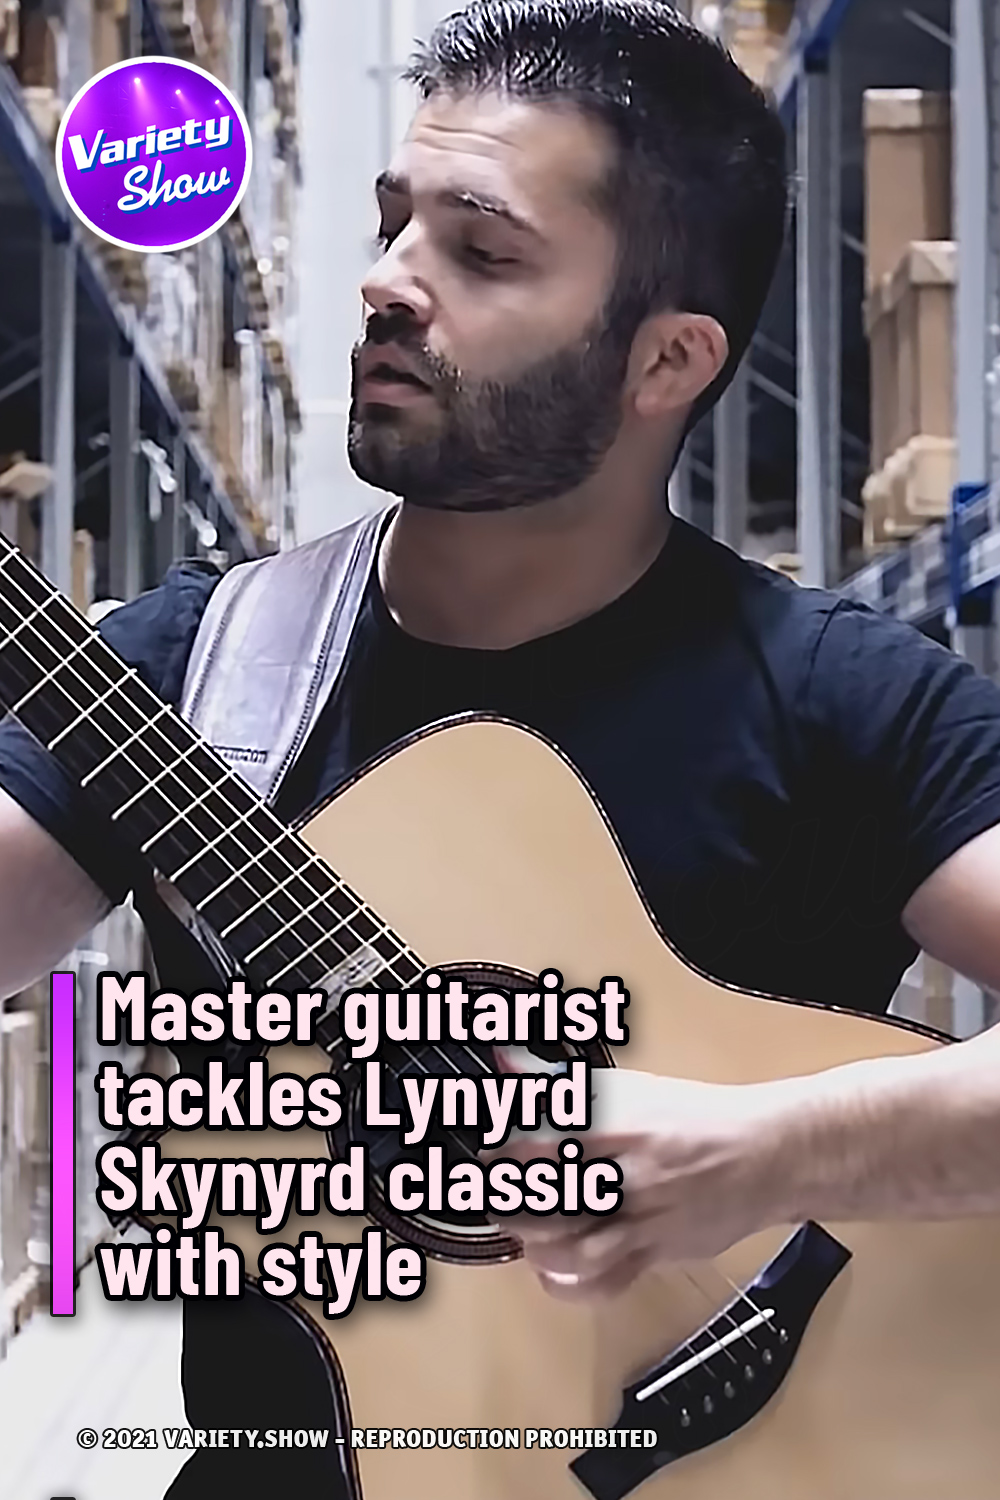 Master guitarist tackles Lynyrd Skynyrd classic with style